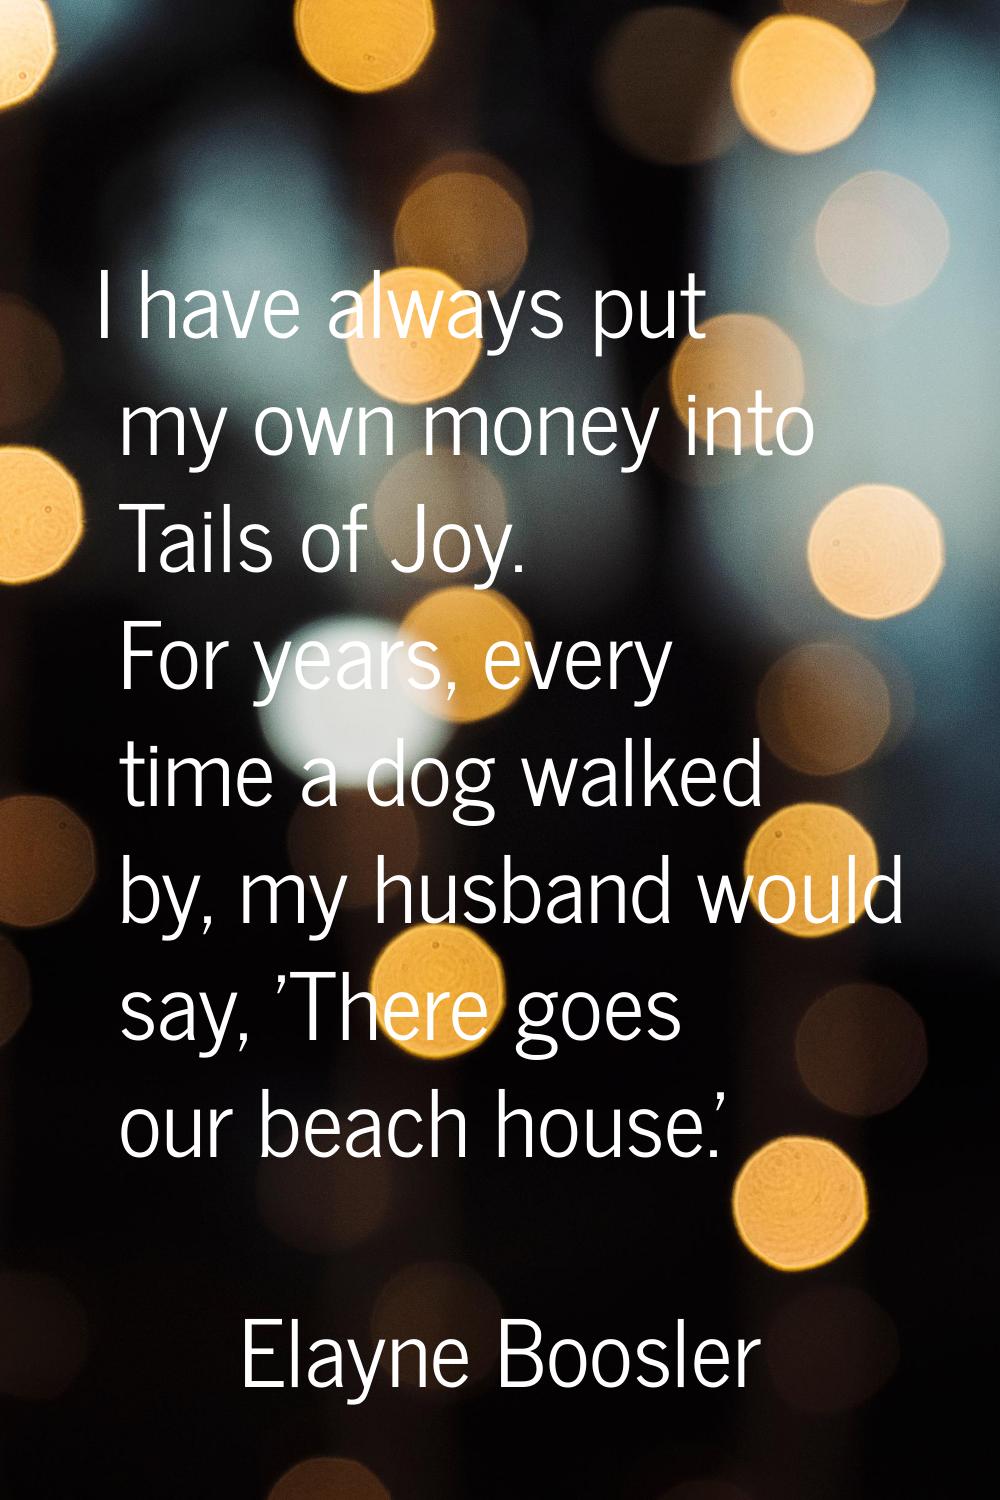 I have always put my own money into Tails of Joy. For years, every time a dog walked by, my husband